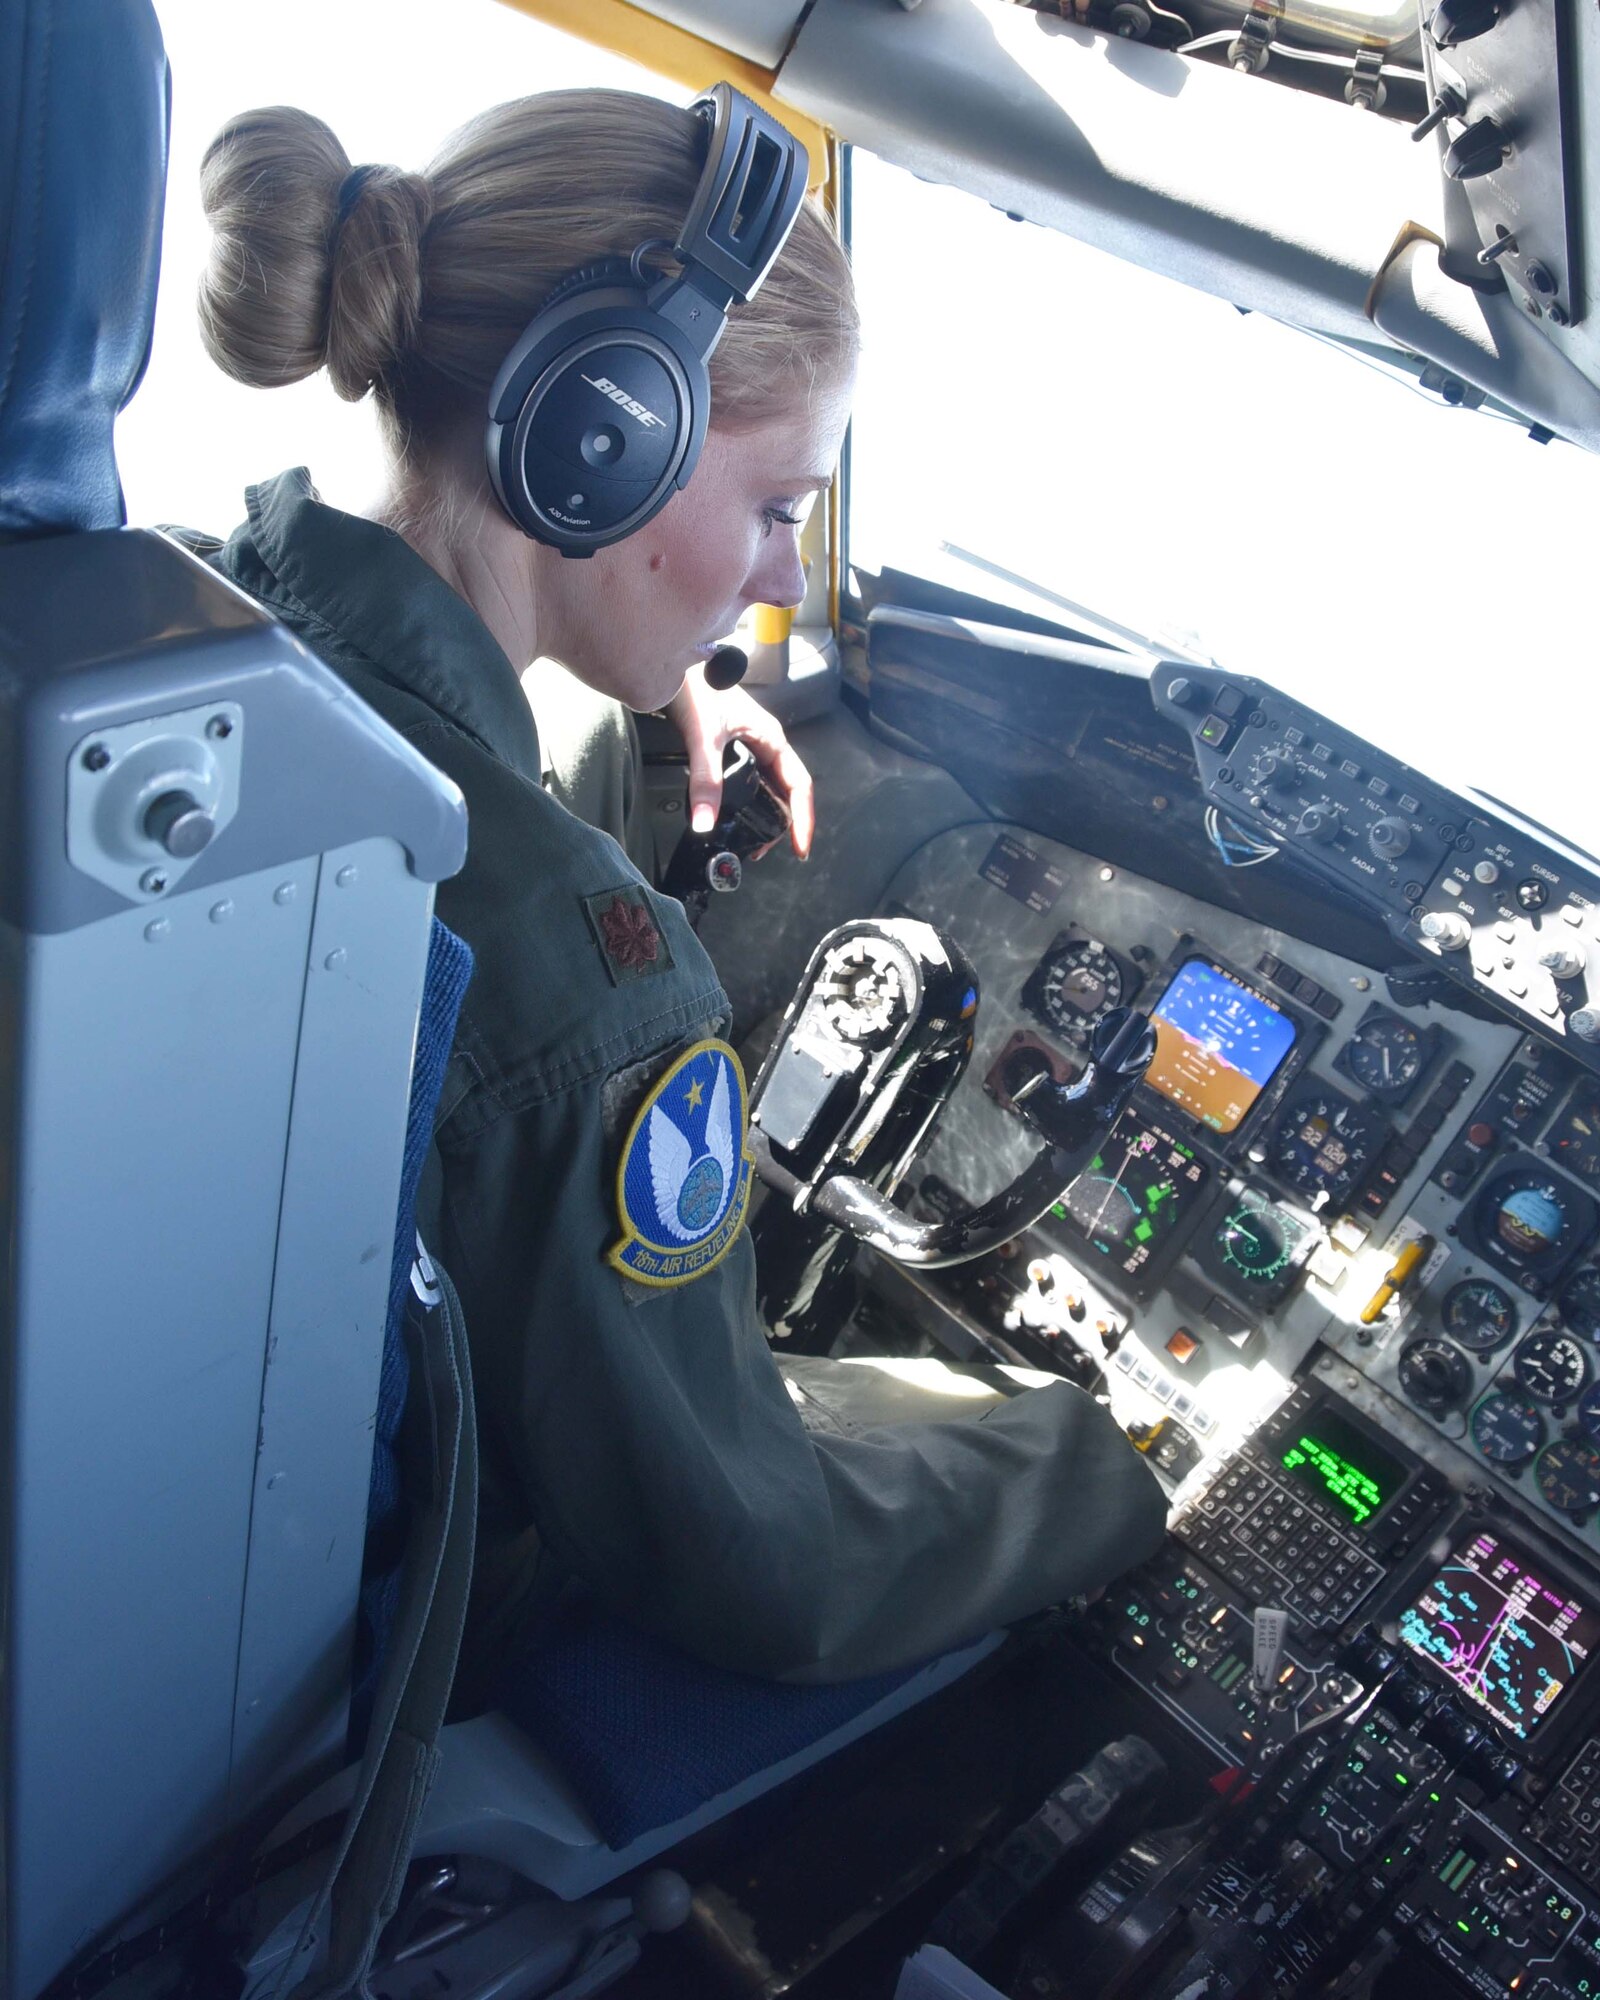 Maj. Monica Riggs, 18th Air Refueling Squadron chief pilot, flys a KC-135 Stratotanker during an 'unmanned' flight, April 9, 2019. Riggs was part of a five-person, all-female aircrew. During the flight, the crew performed air refueling for F-16 Fighting Falcons from the 54th Fighter Squadron out of Holloman Air Force Base, N. M.